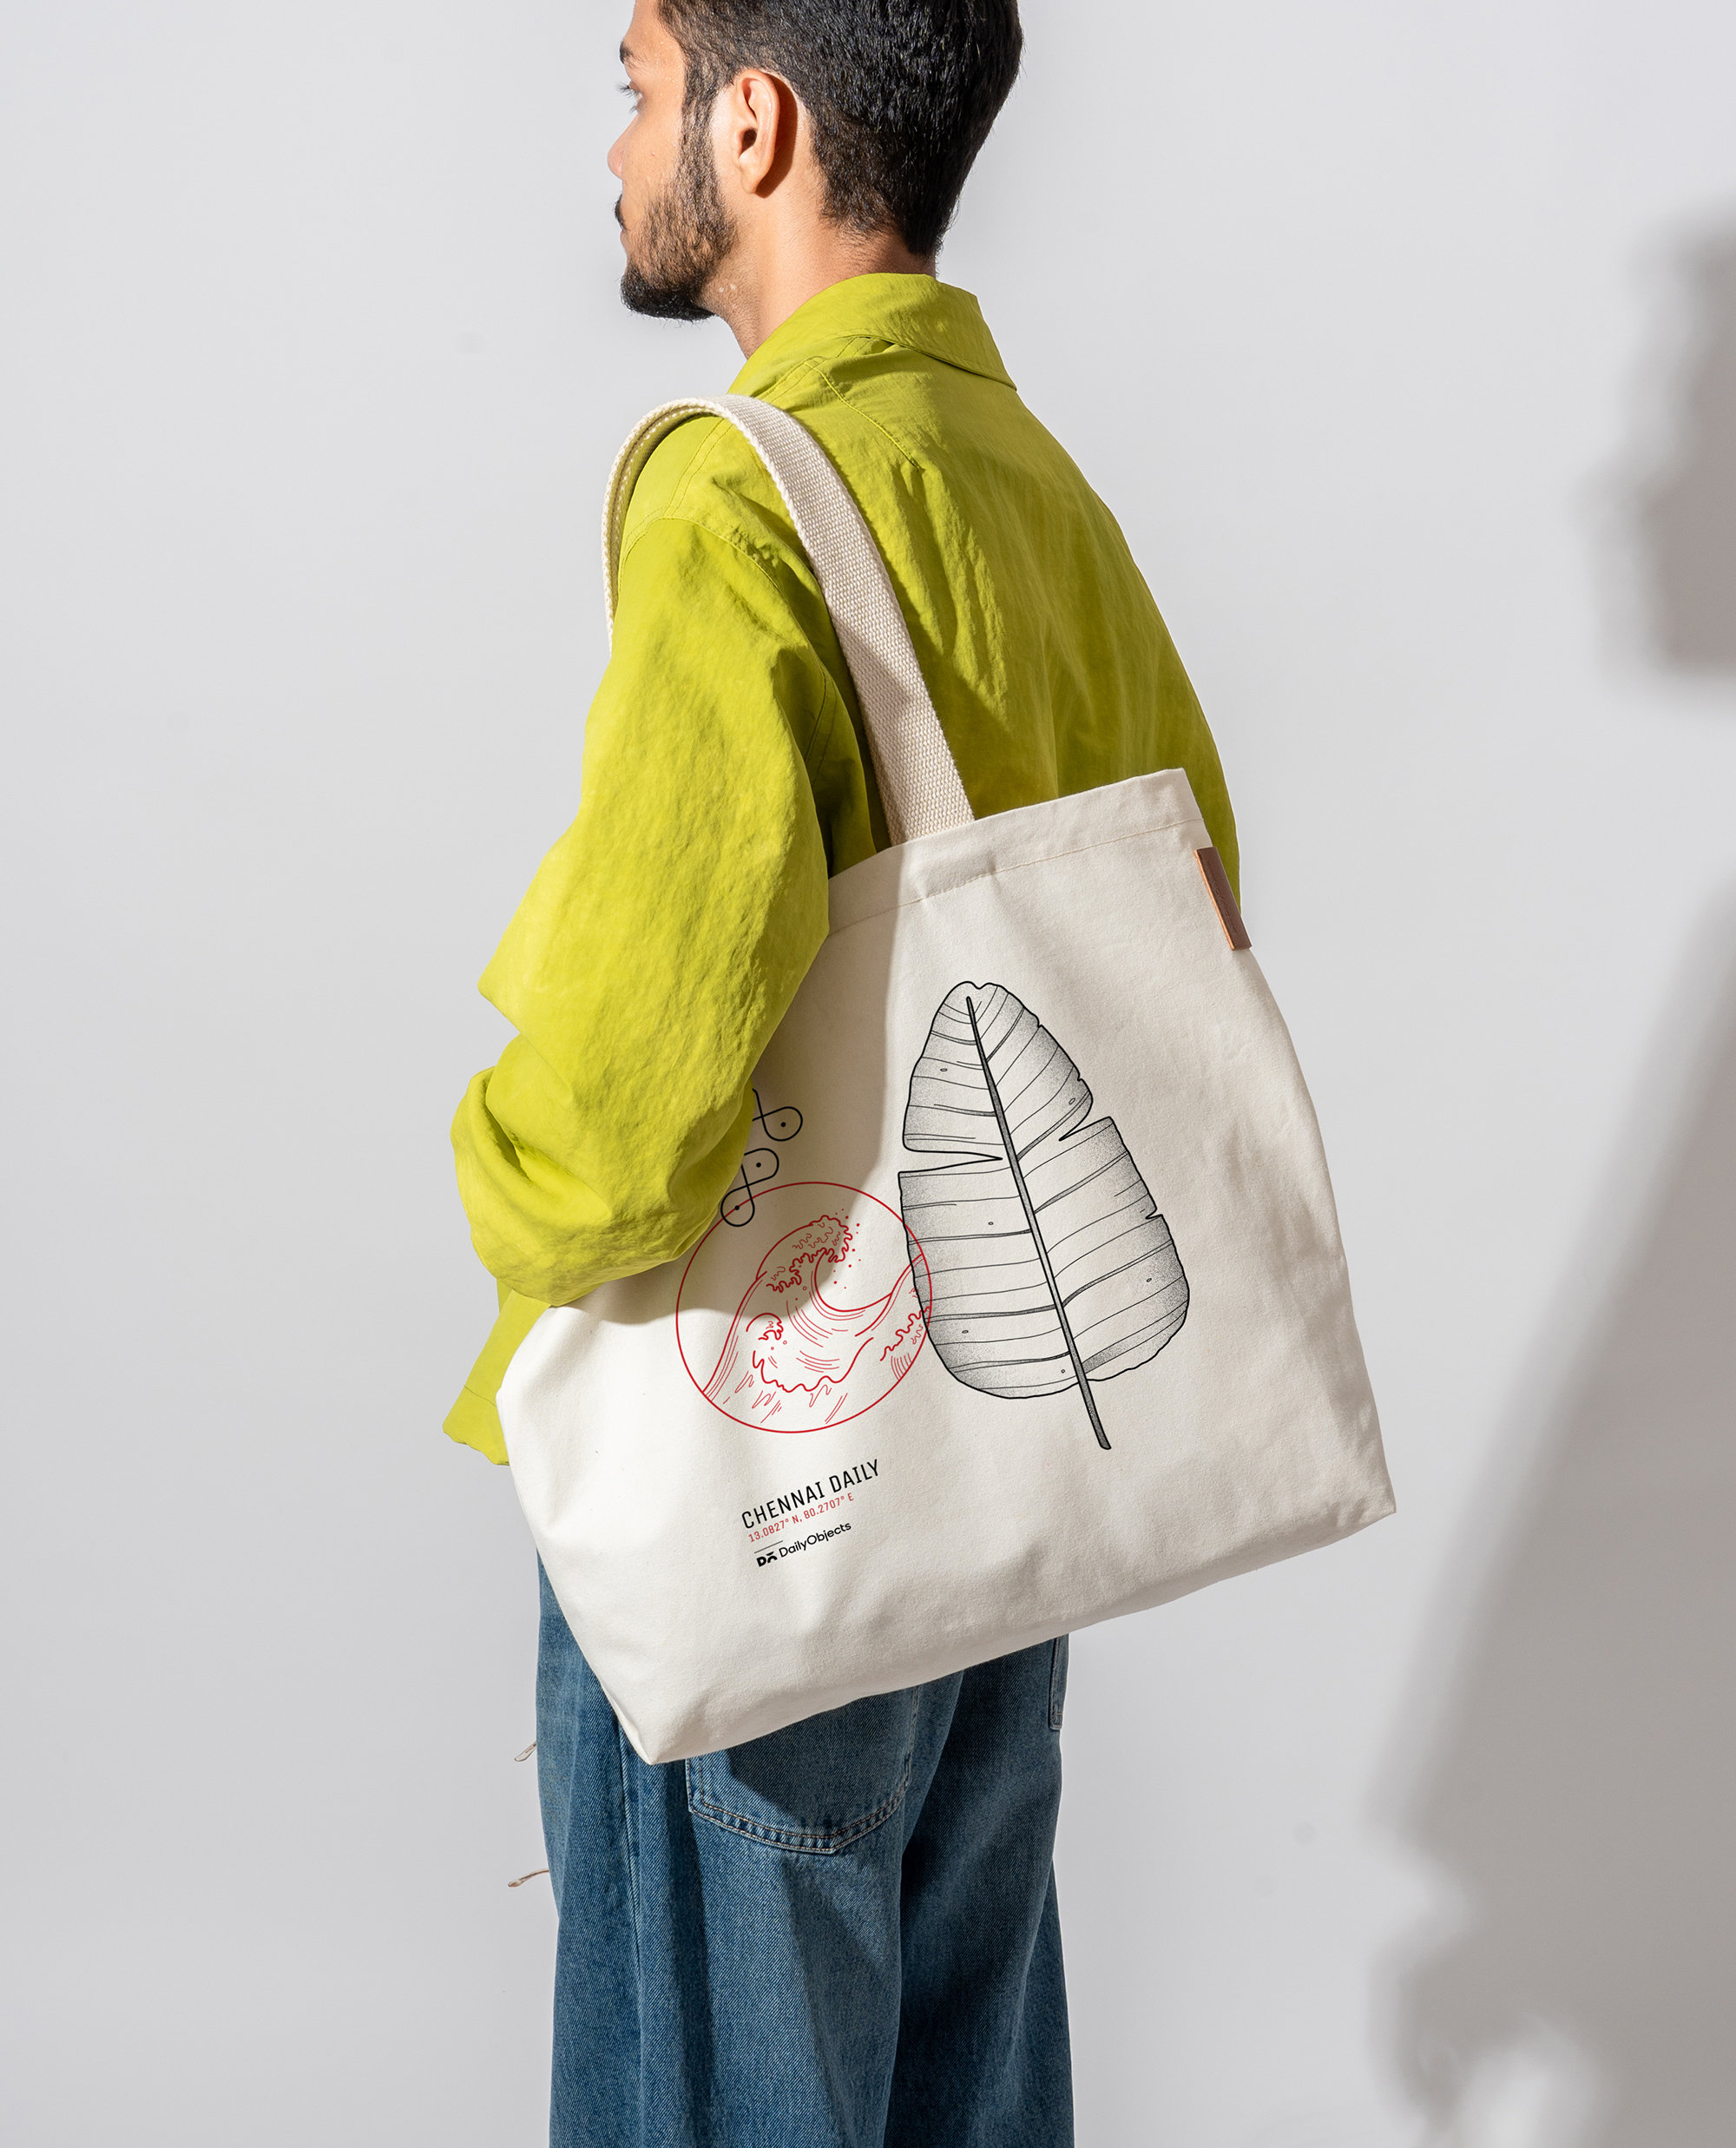 Collage Of Different Daily Objects Tote Bag by Guy Vanderelst - Photos.com